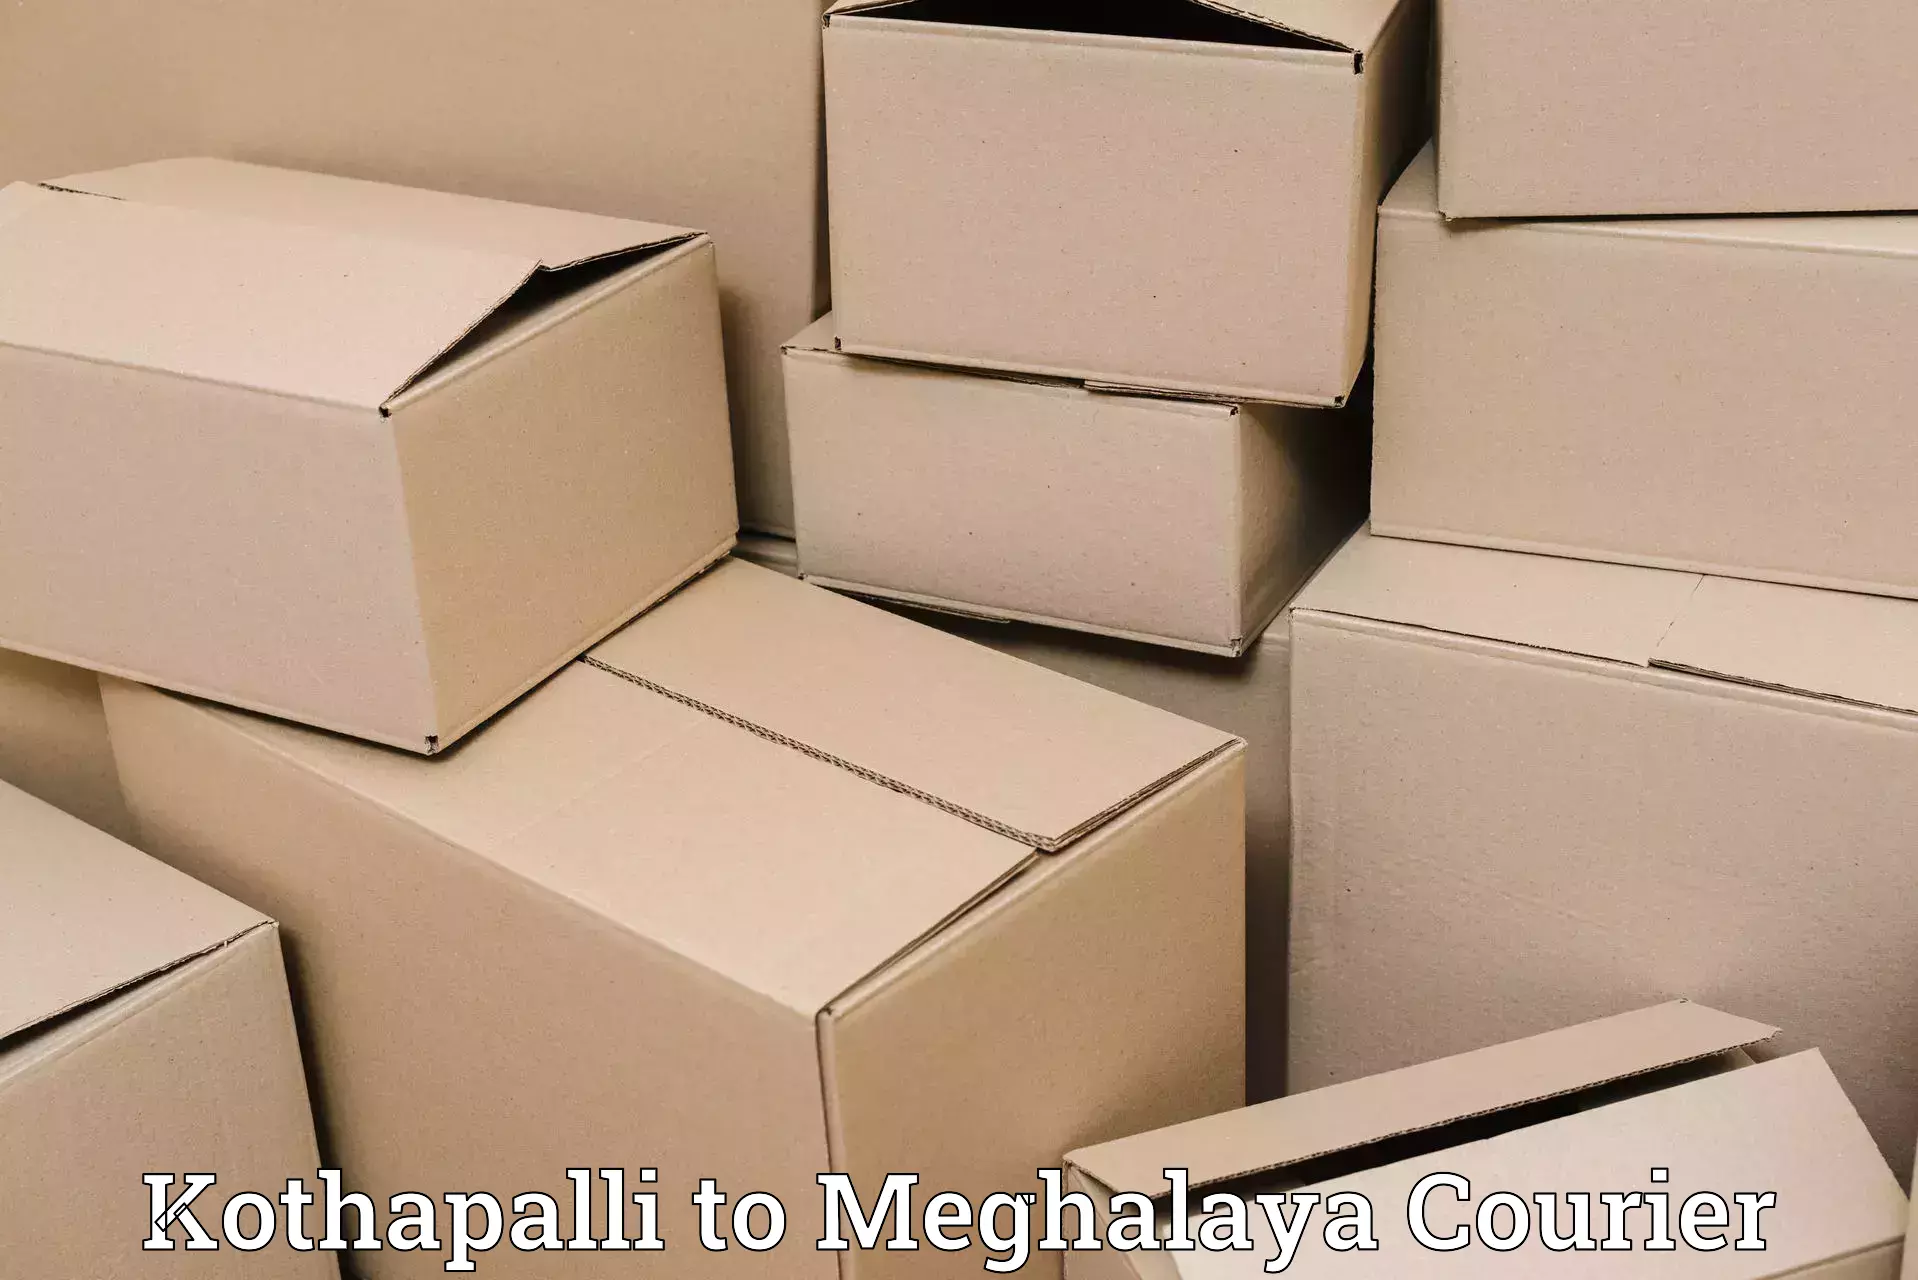 Customer-focused courier Kothapalli to Nongpoh